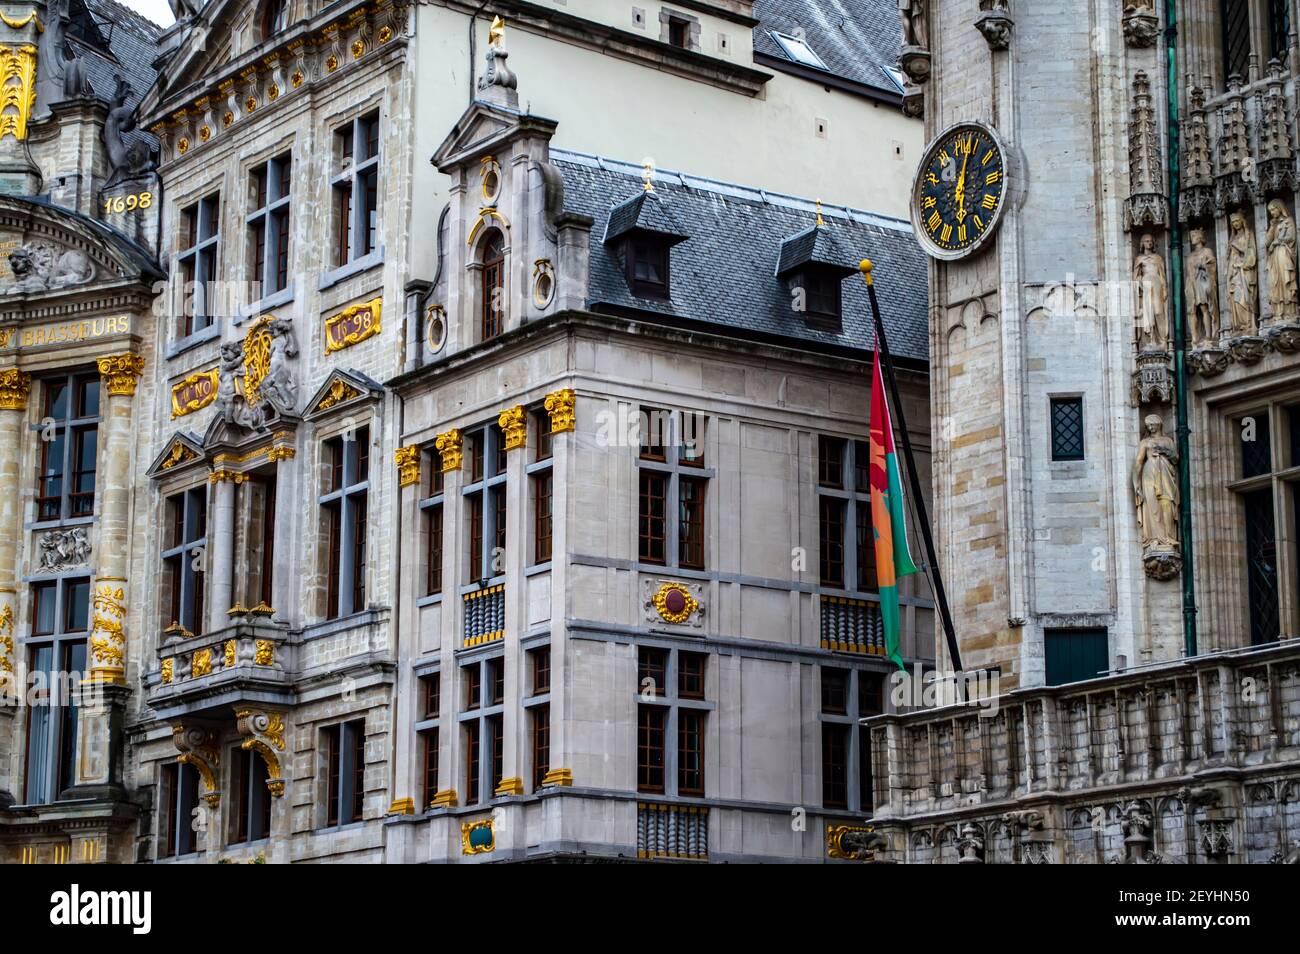 Brussels, Belgium - July 13, 2019: Architecture details of building located around the Grand Place square of Brussels, Belgium Stock Photo